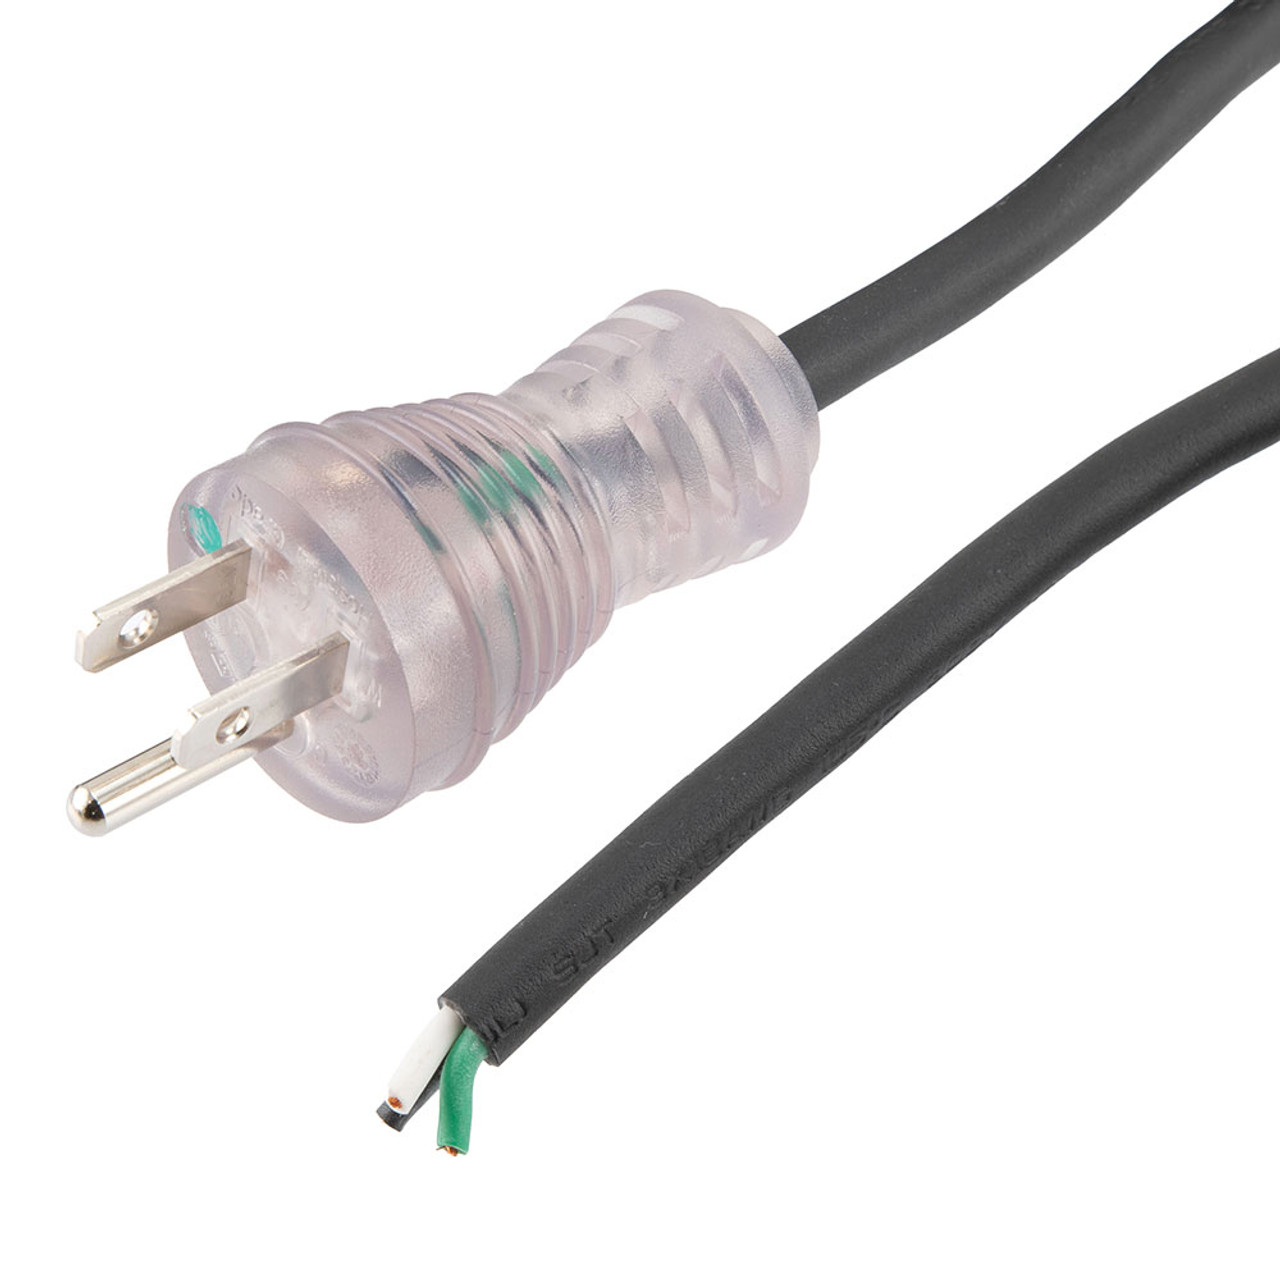 Hospital Grade NEMA 5-15 With LED to Open Coiled Power Cord 18 AWG TPE Jacket, 1 Foot Compressed Length